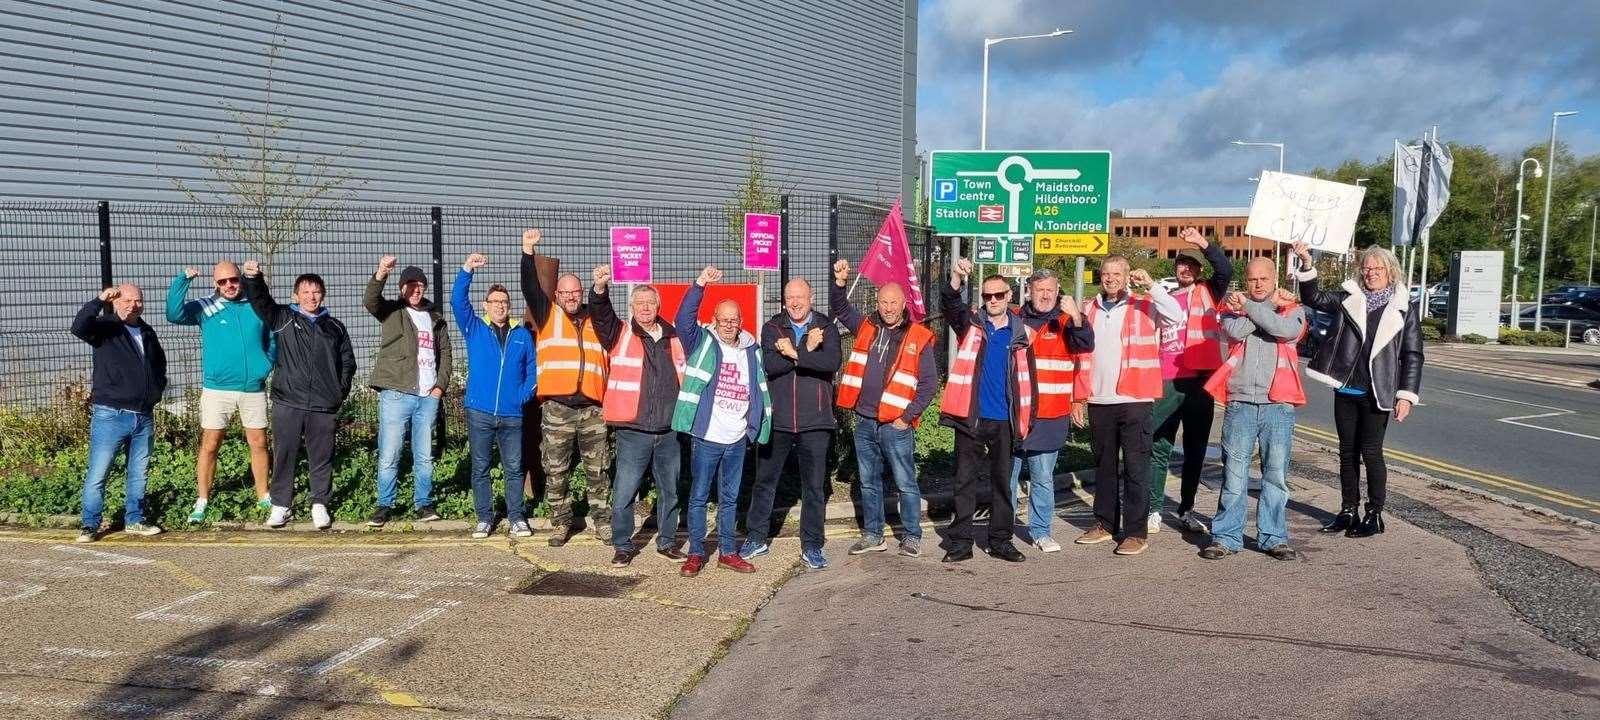 The picket line in Tonbridge as 50,000 workers join strike across the country. Images: Julian Wilson